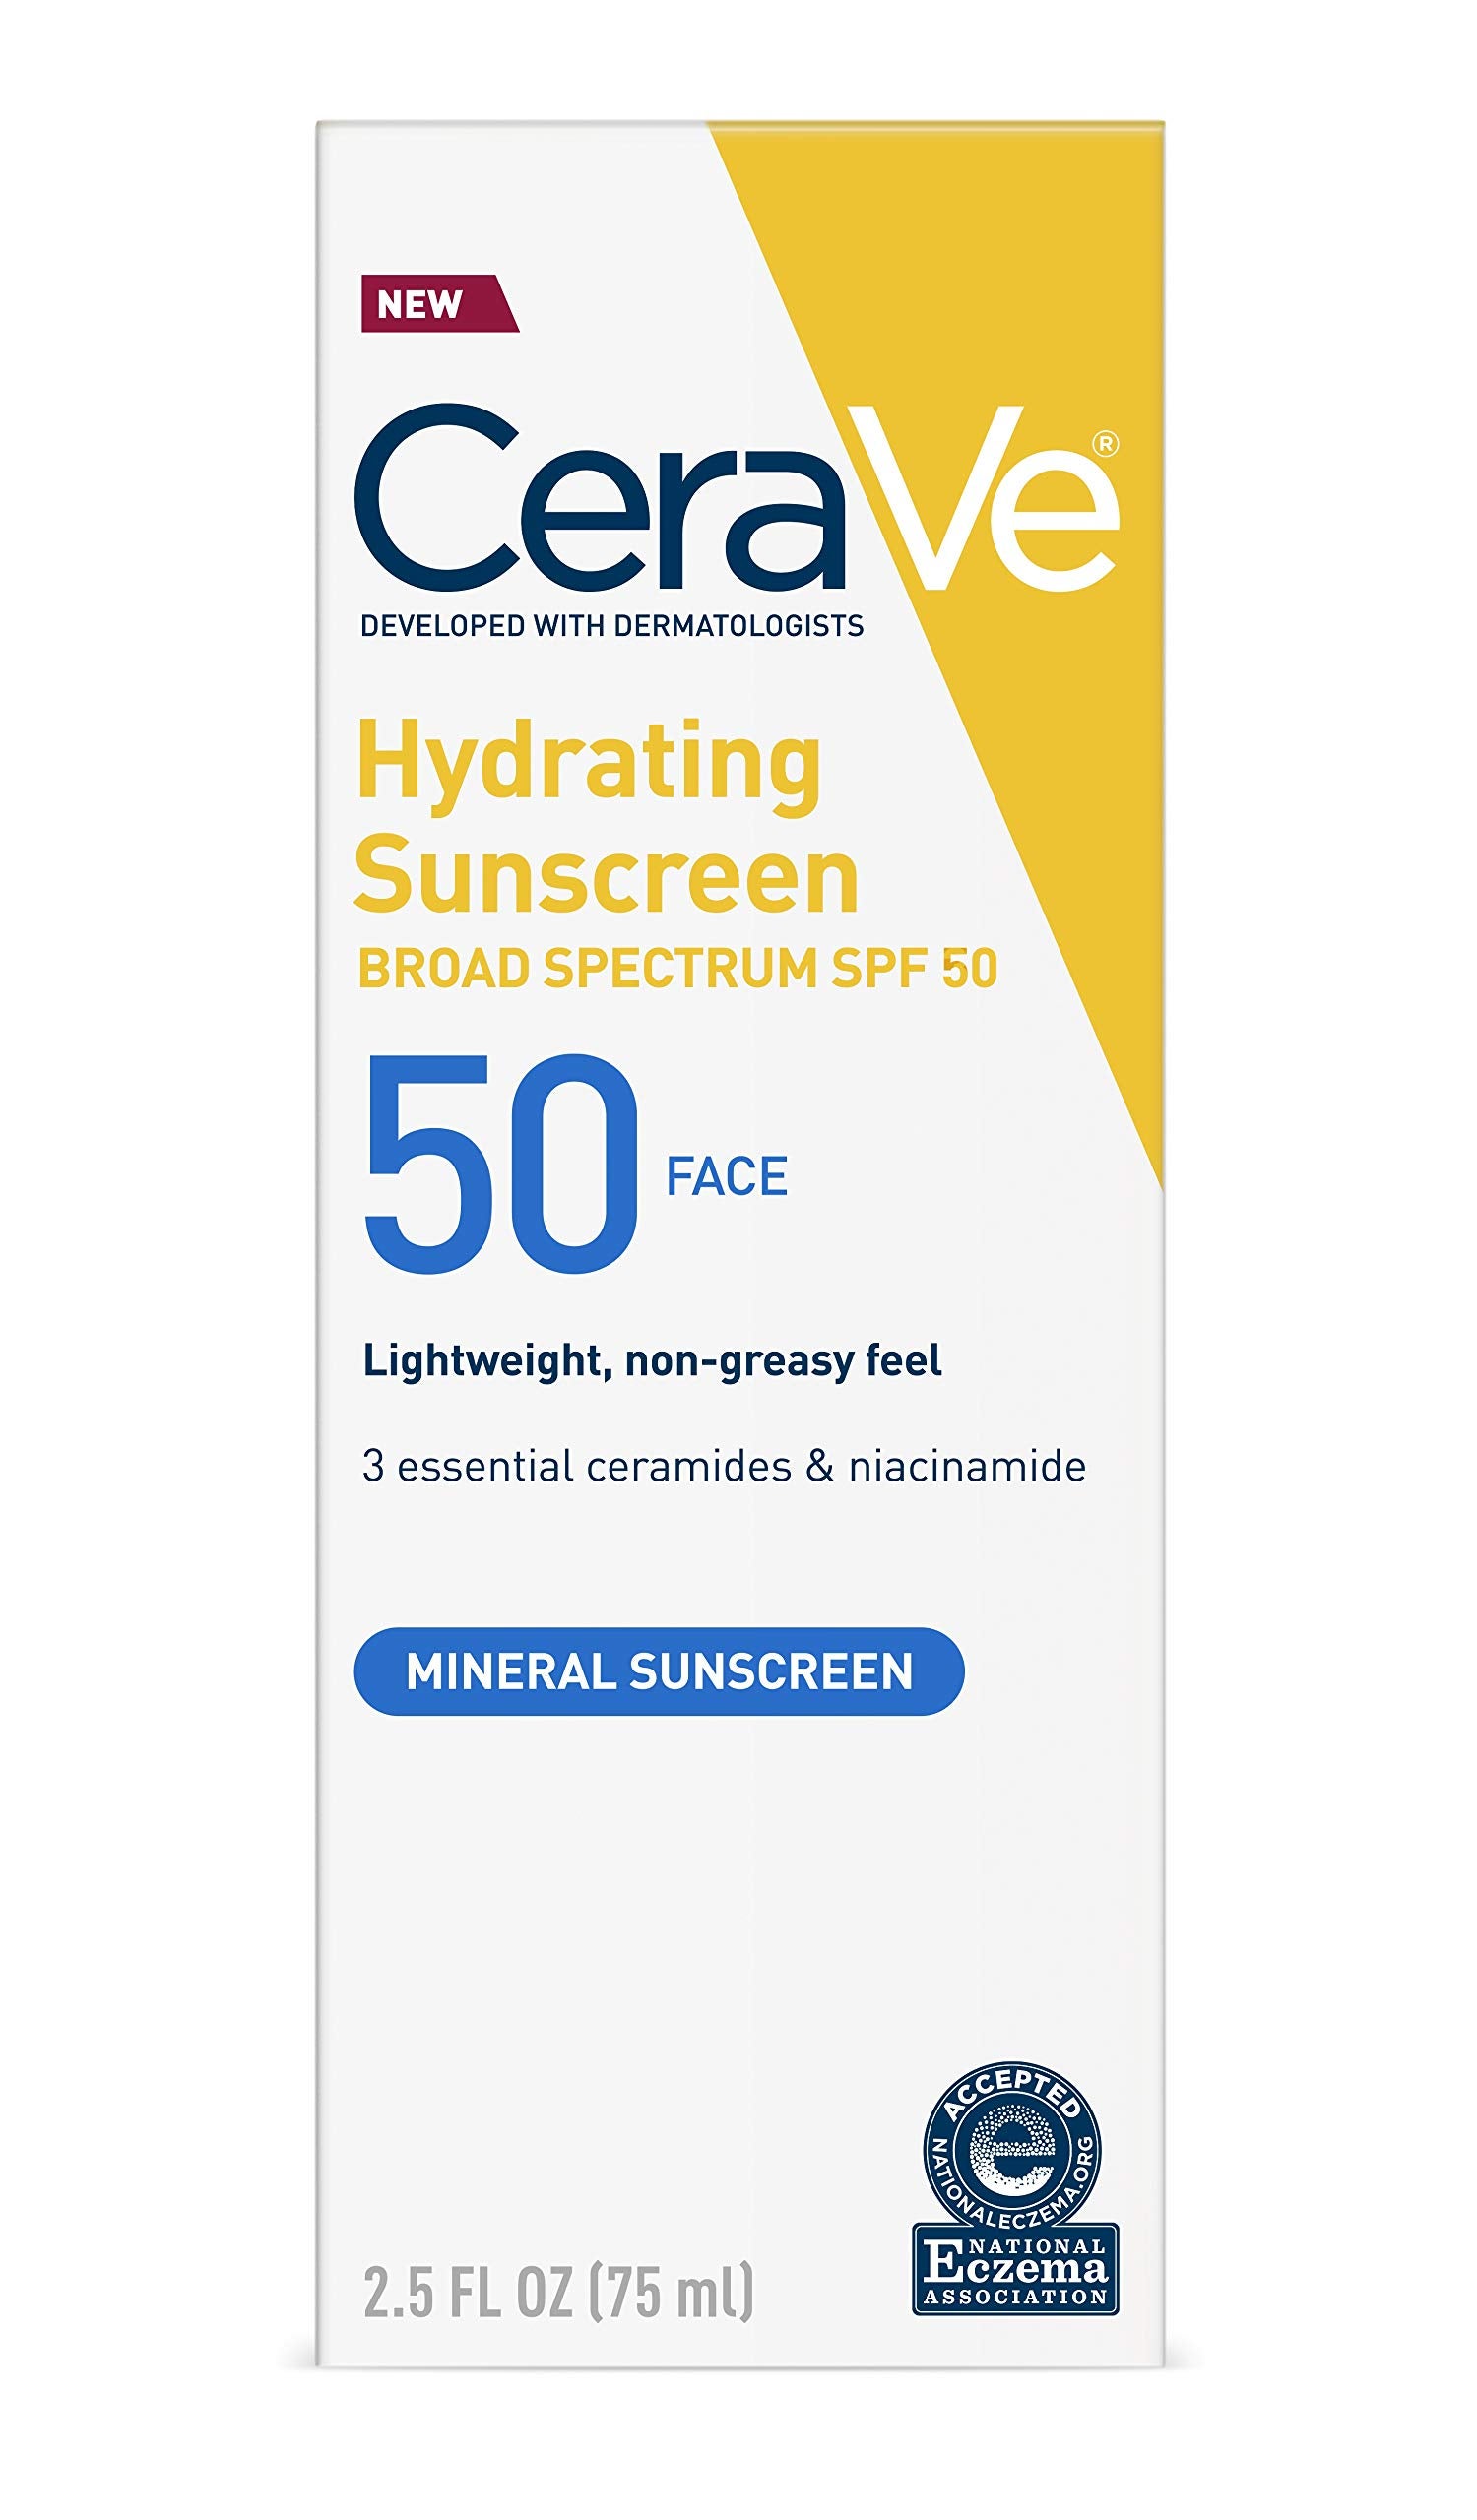 cerave tinted sunscreen with spf 30 target